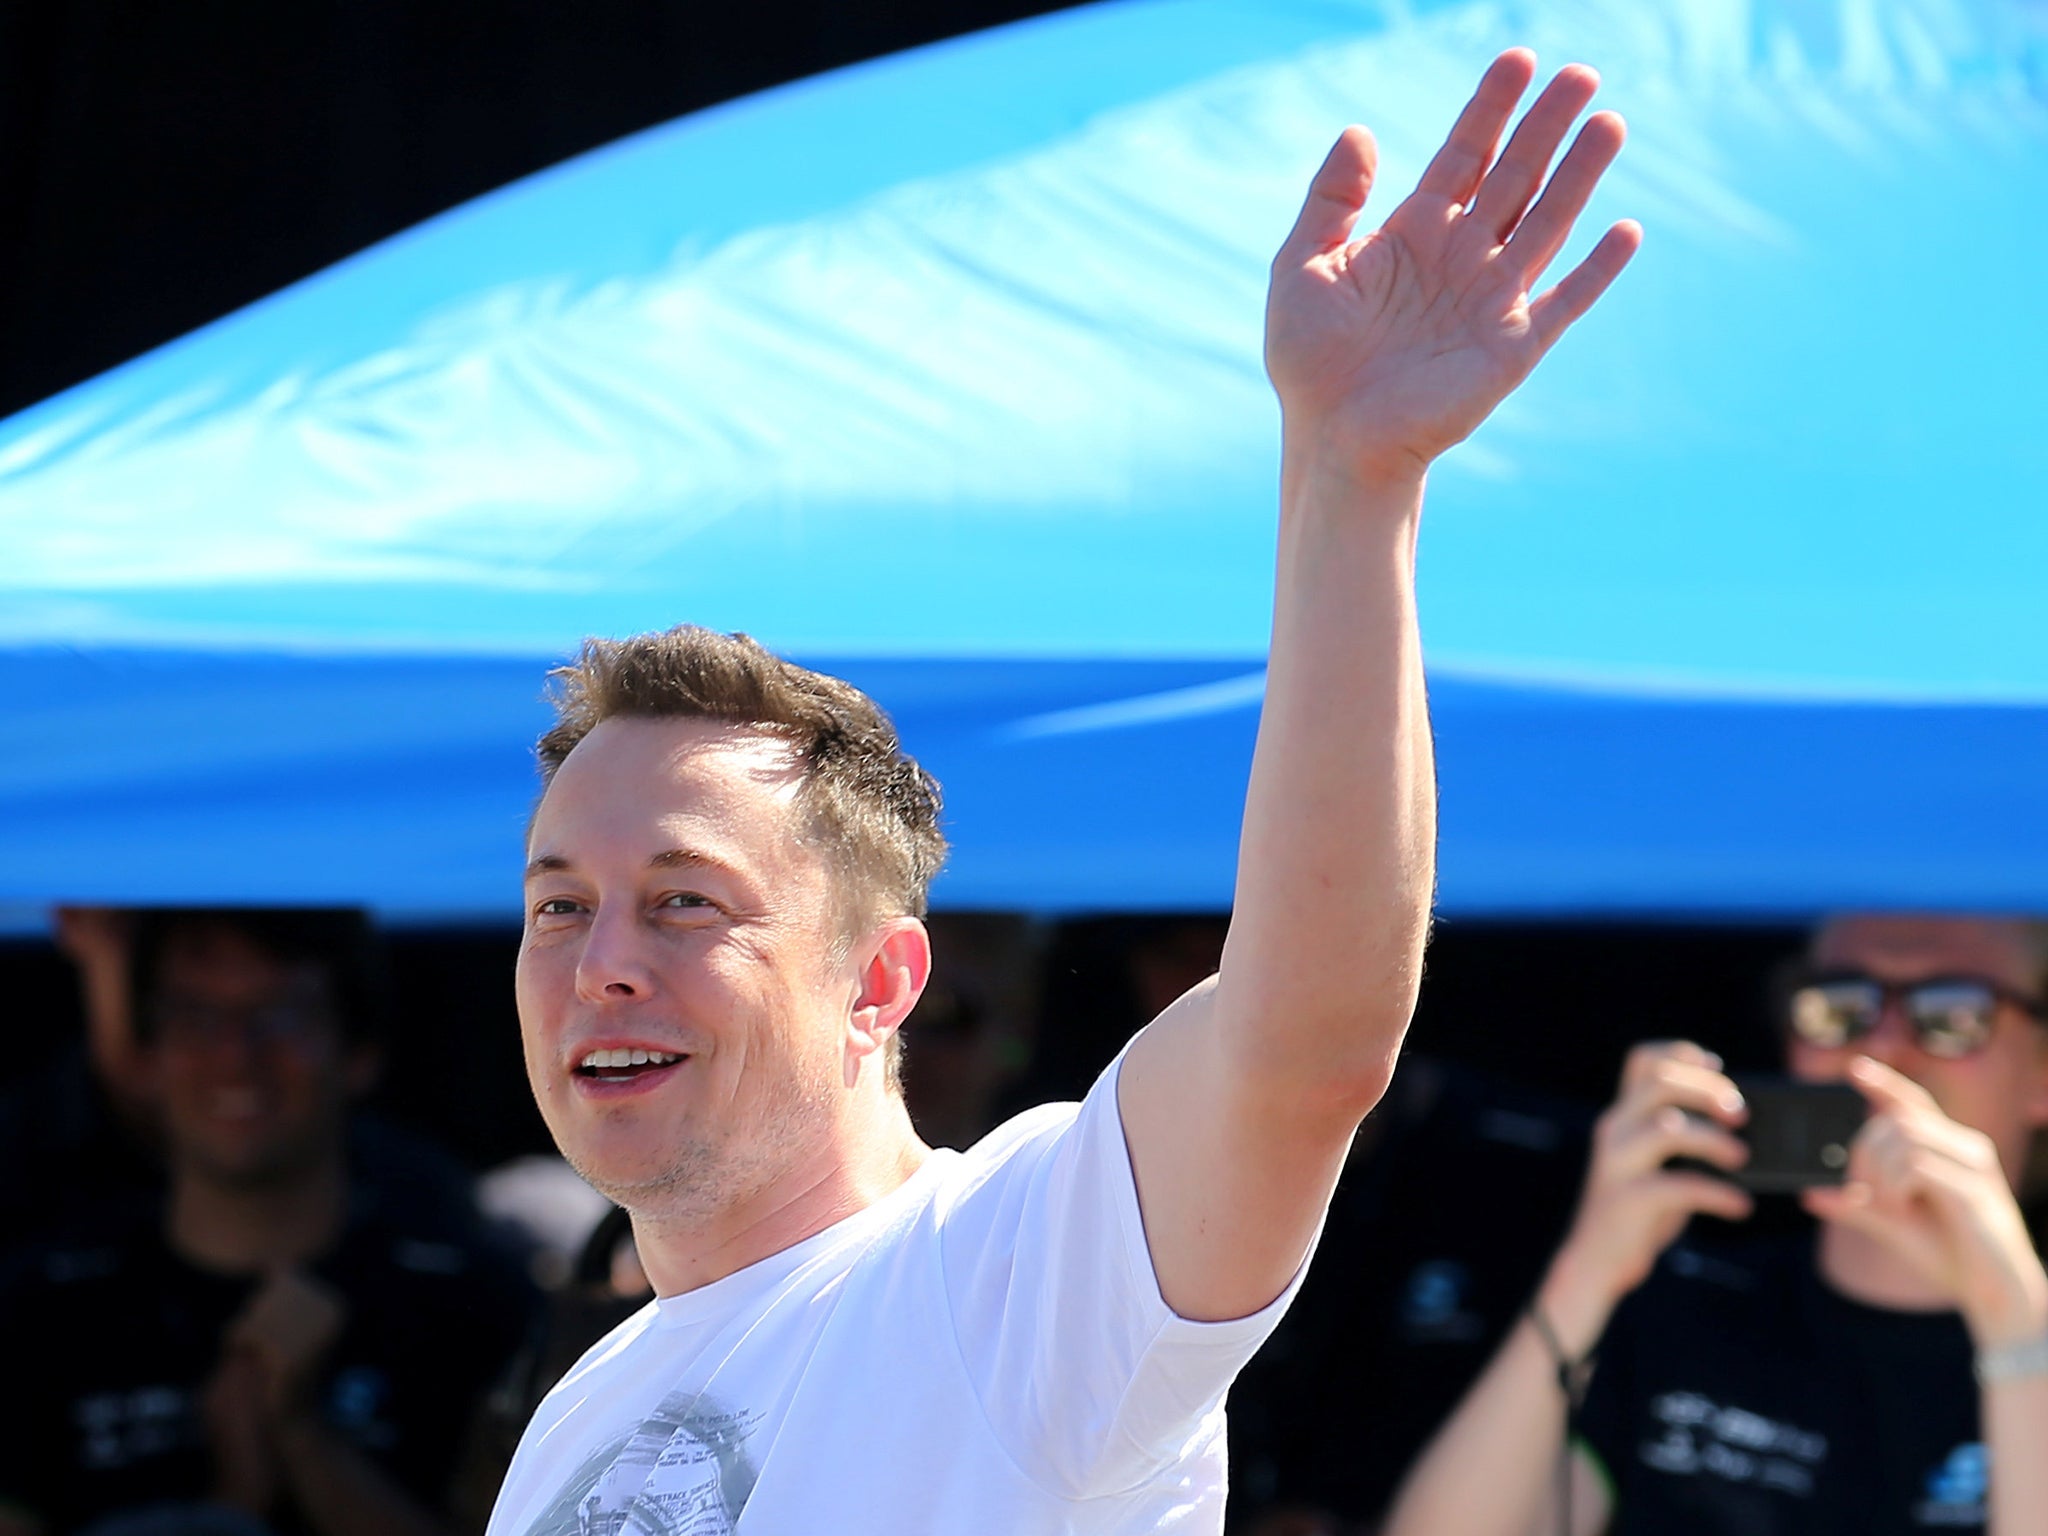 The Tesla chief executive has denied that the company is fundraising